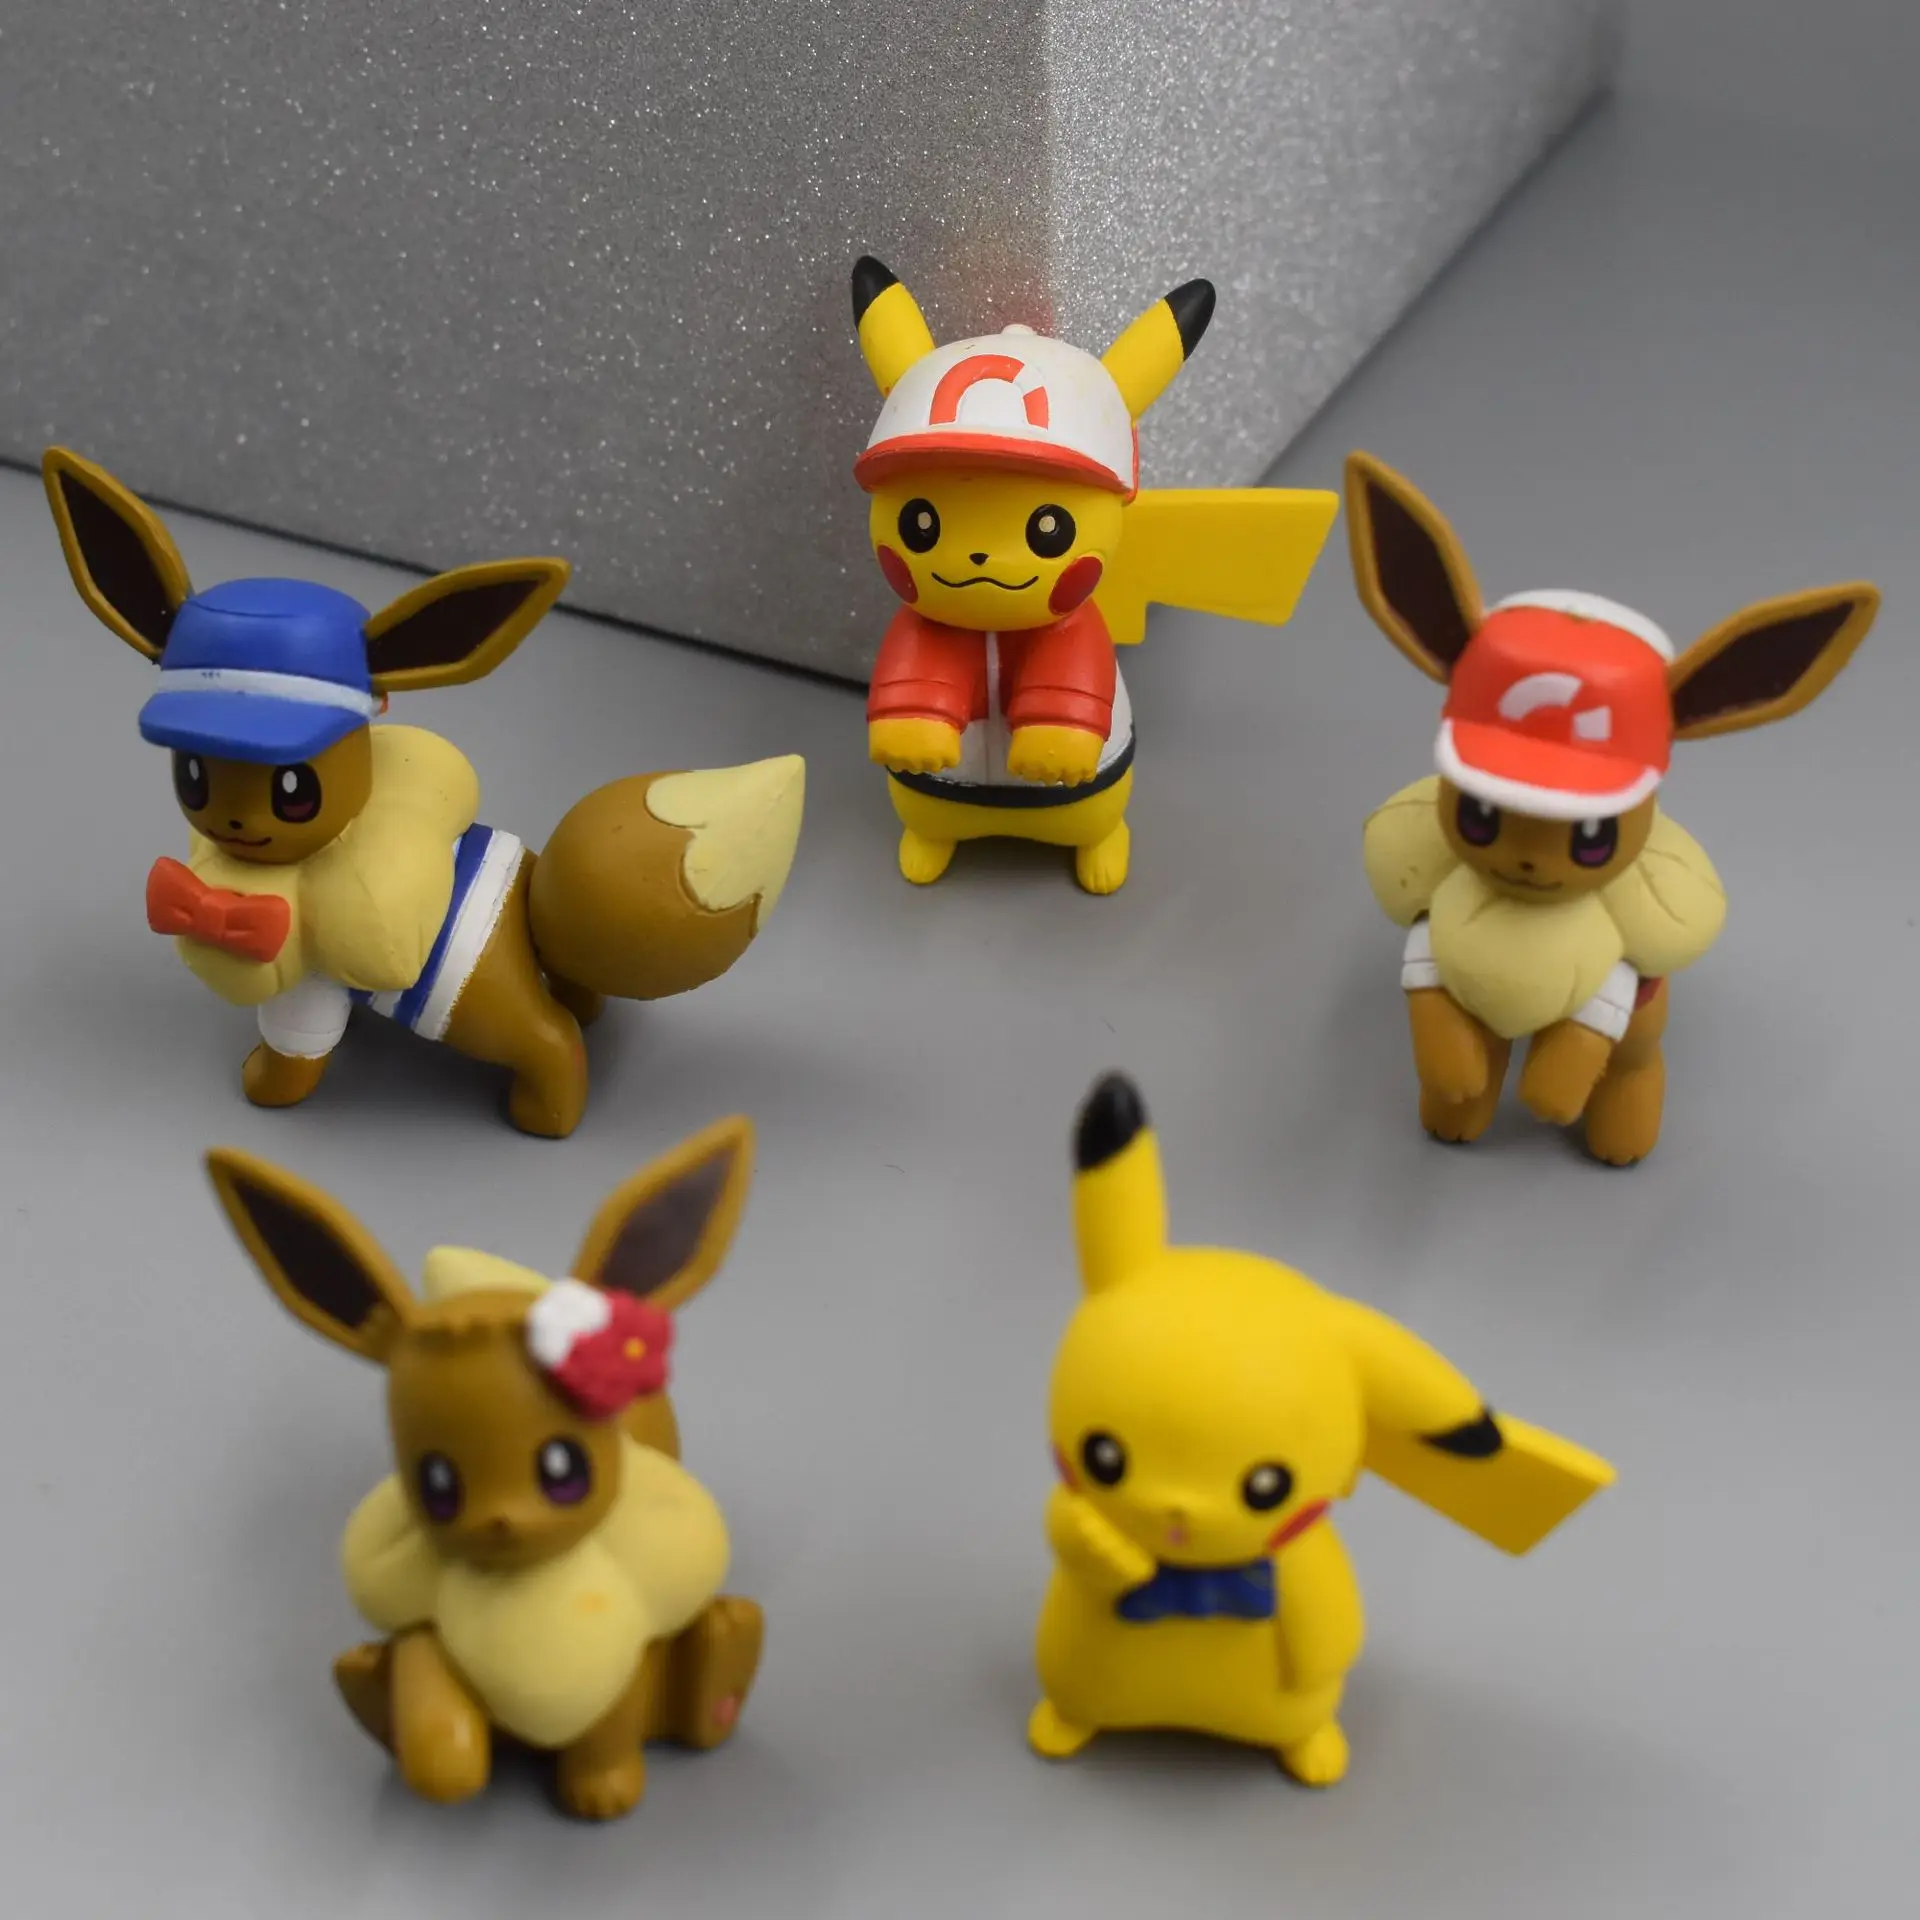 

Pokemon Pocket Monster Pikachu Eevee Kawaii Cute Doll Gifts Toy Model Anime Figures Collect Ornaments